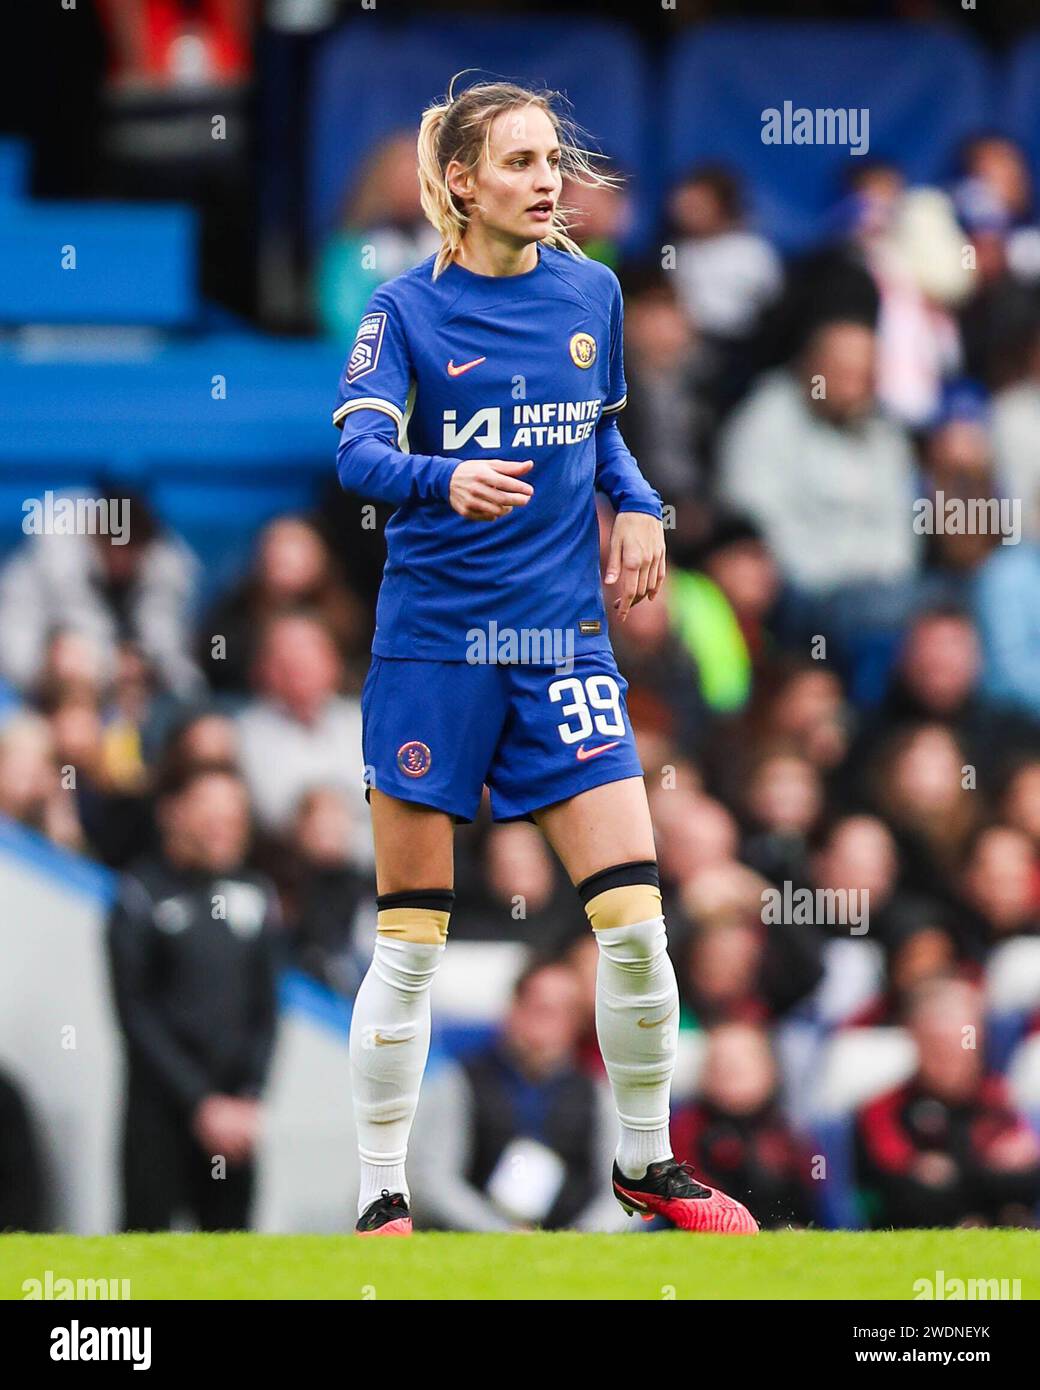 London, England, United Kingdom on 21 January 2024. Chelsea's Nathalie Bjorn in action during the Chelsea Women v Manchester United Women Barclays Women's Super League match at Stamford Bridge, London, England, United Kingdom on 21 January 2024 Credit: Every Second Media/Alamy Live News Stock Photo